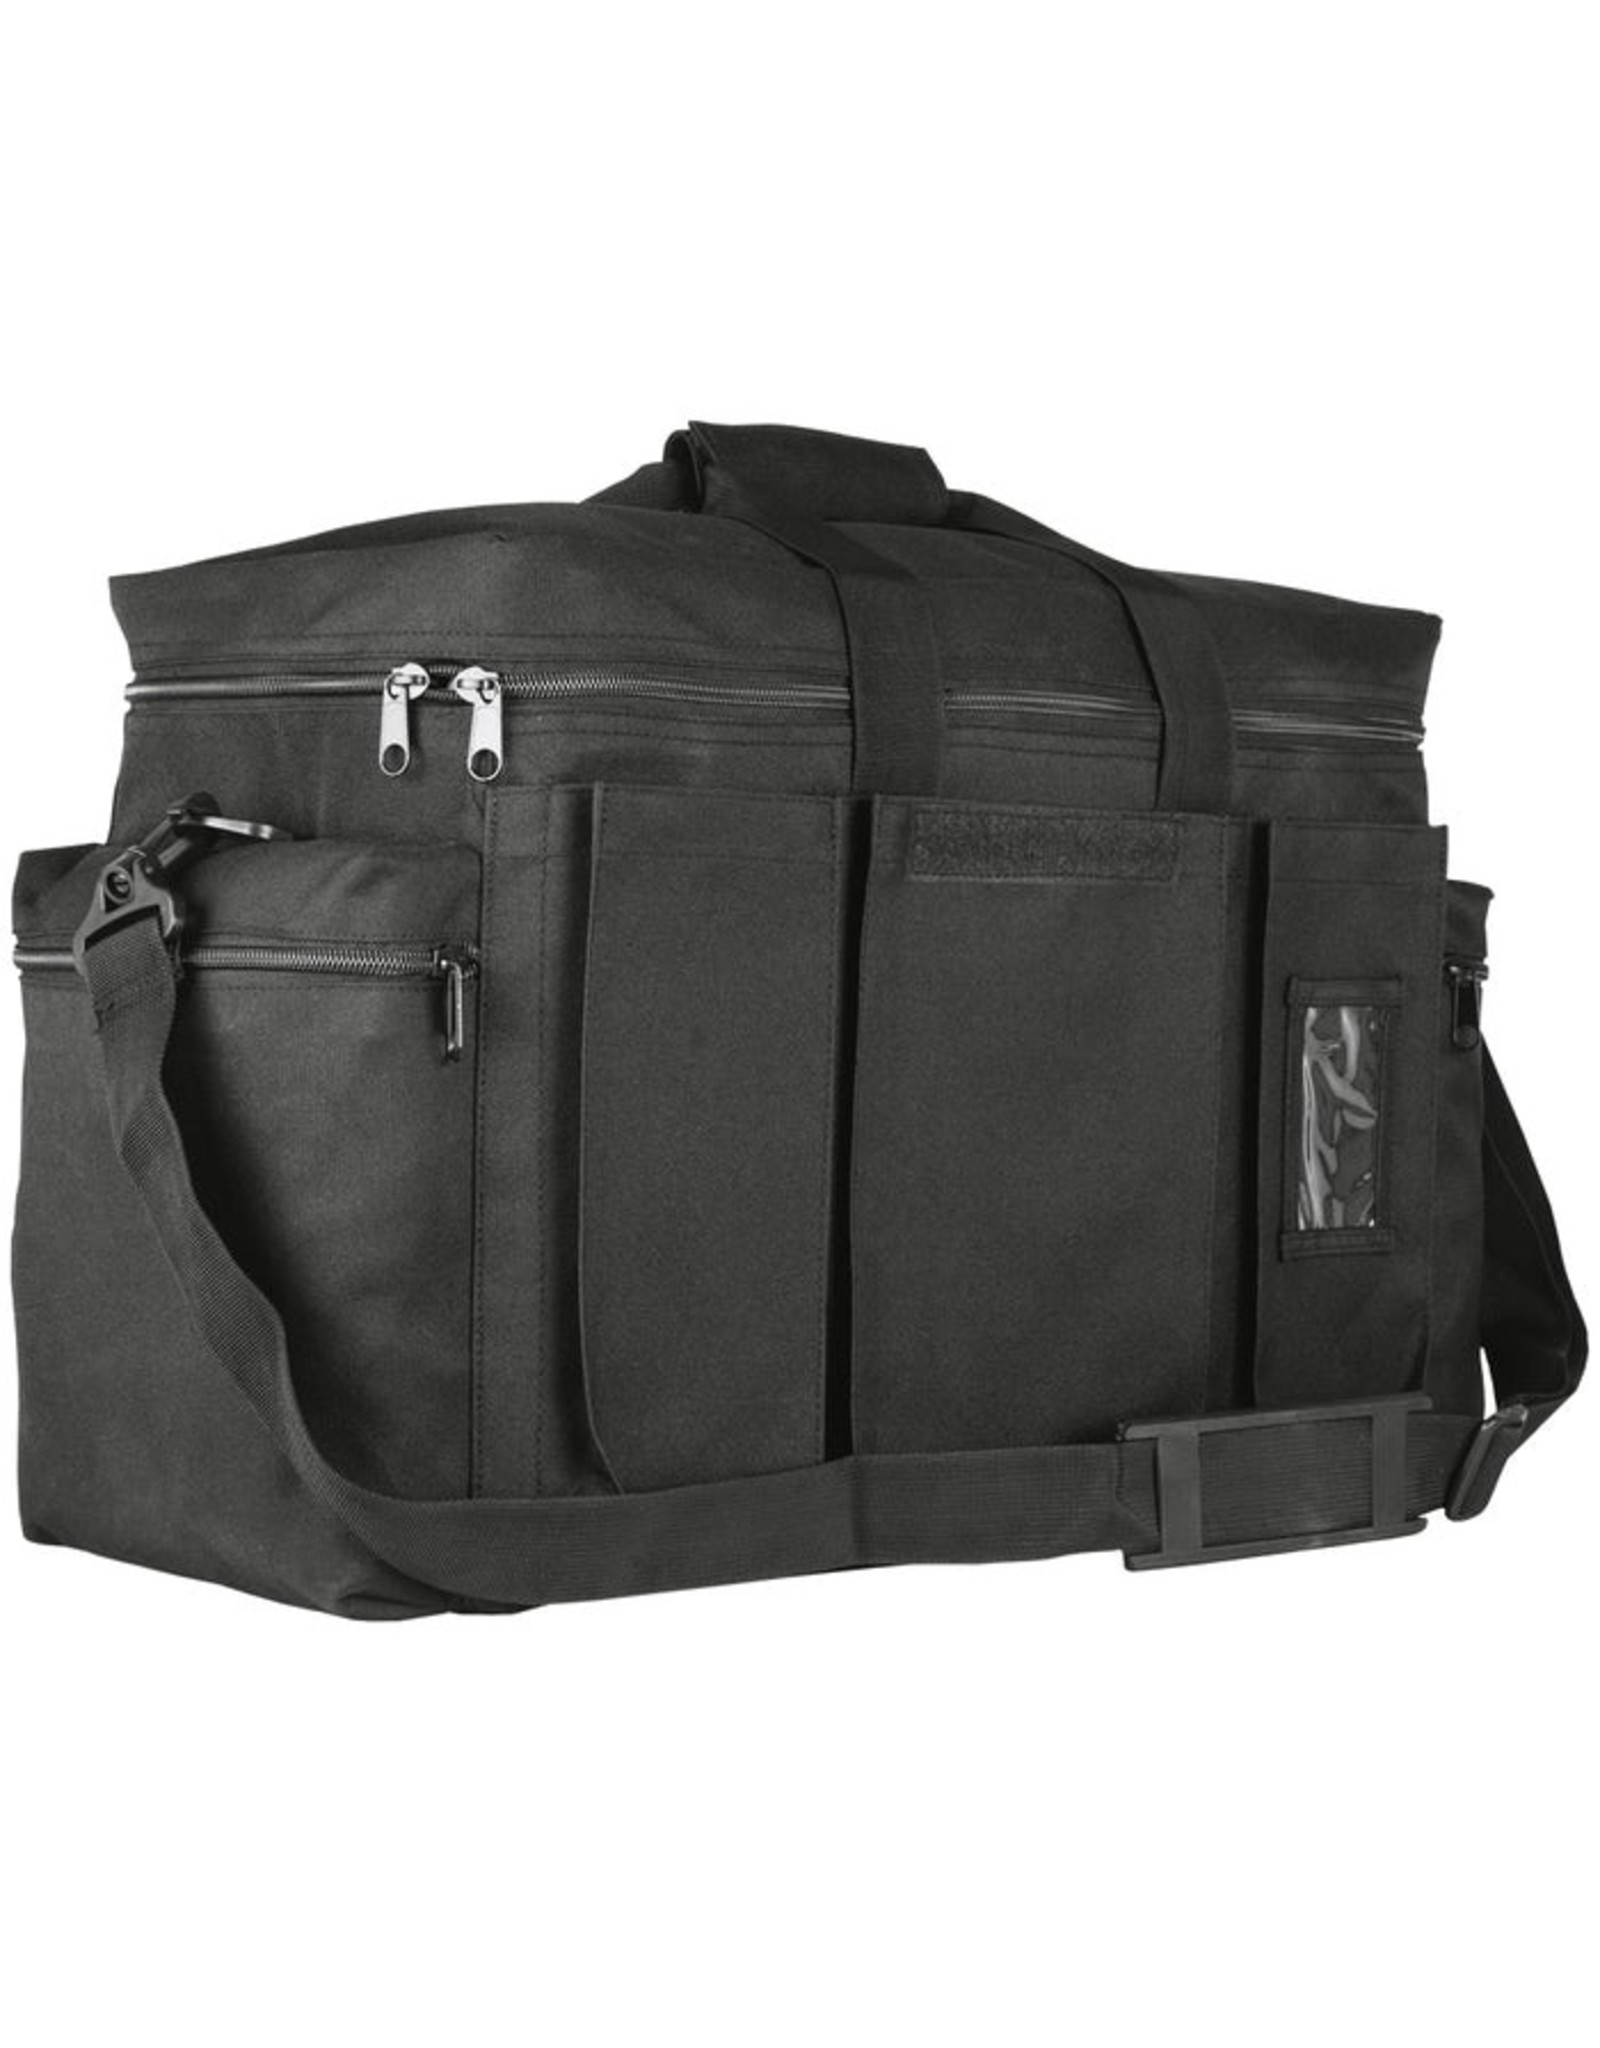 TACTICAL GEAR BAG - Smith Army Surplus